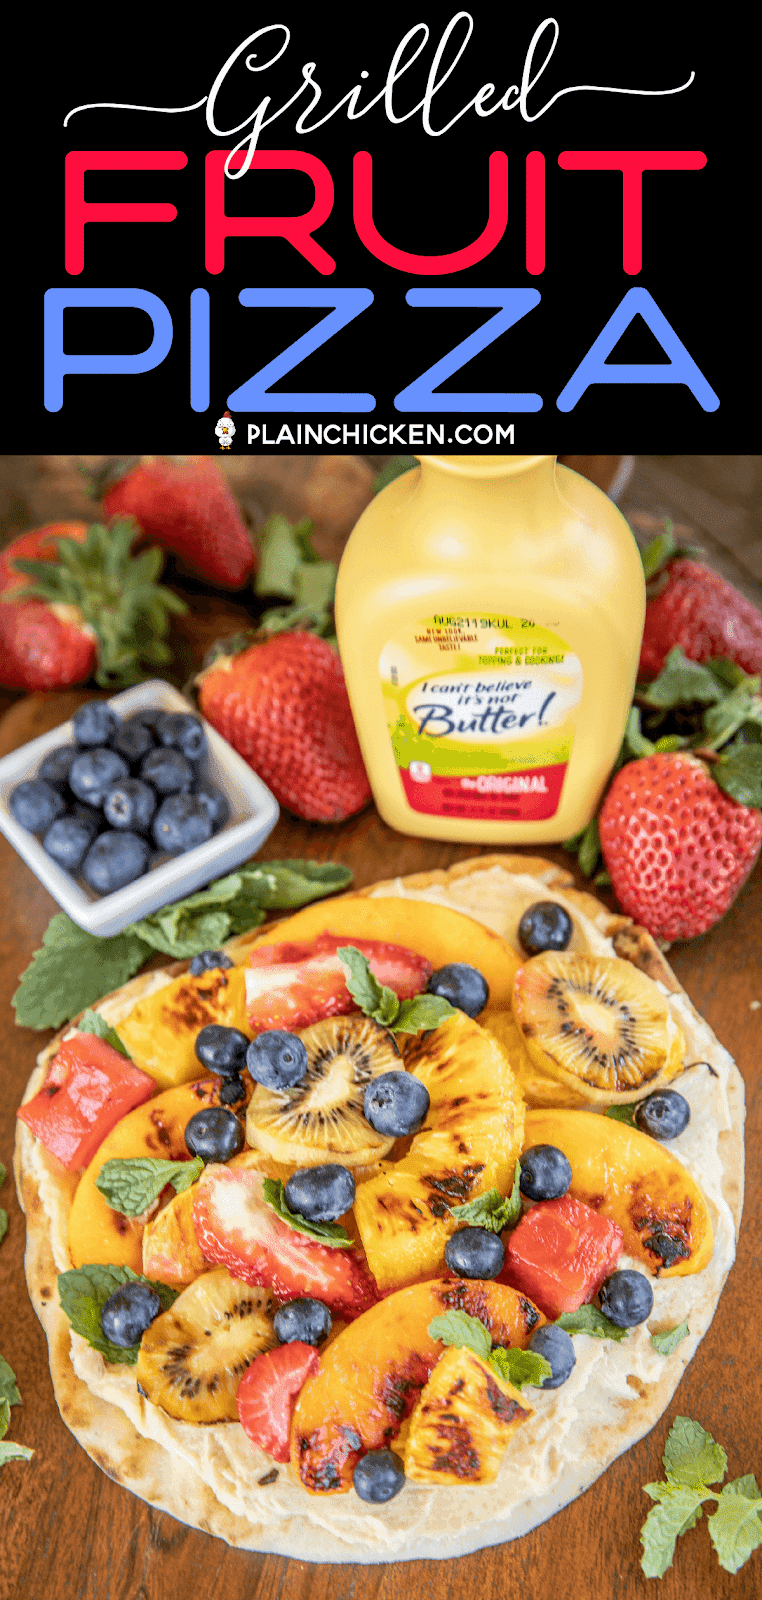 grilled fruit pizza on a cutting board